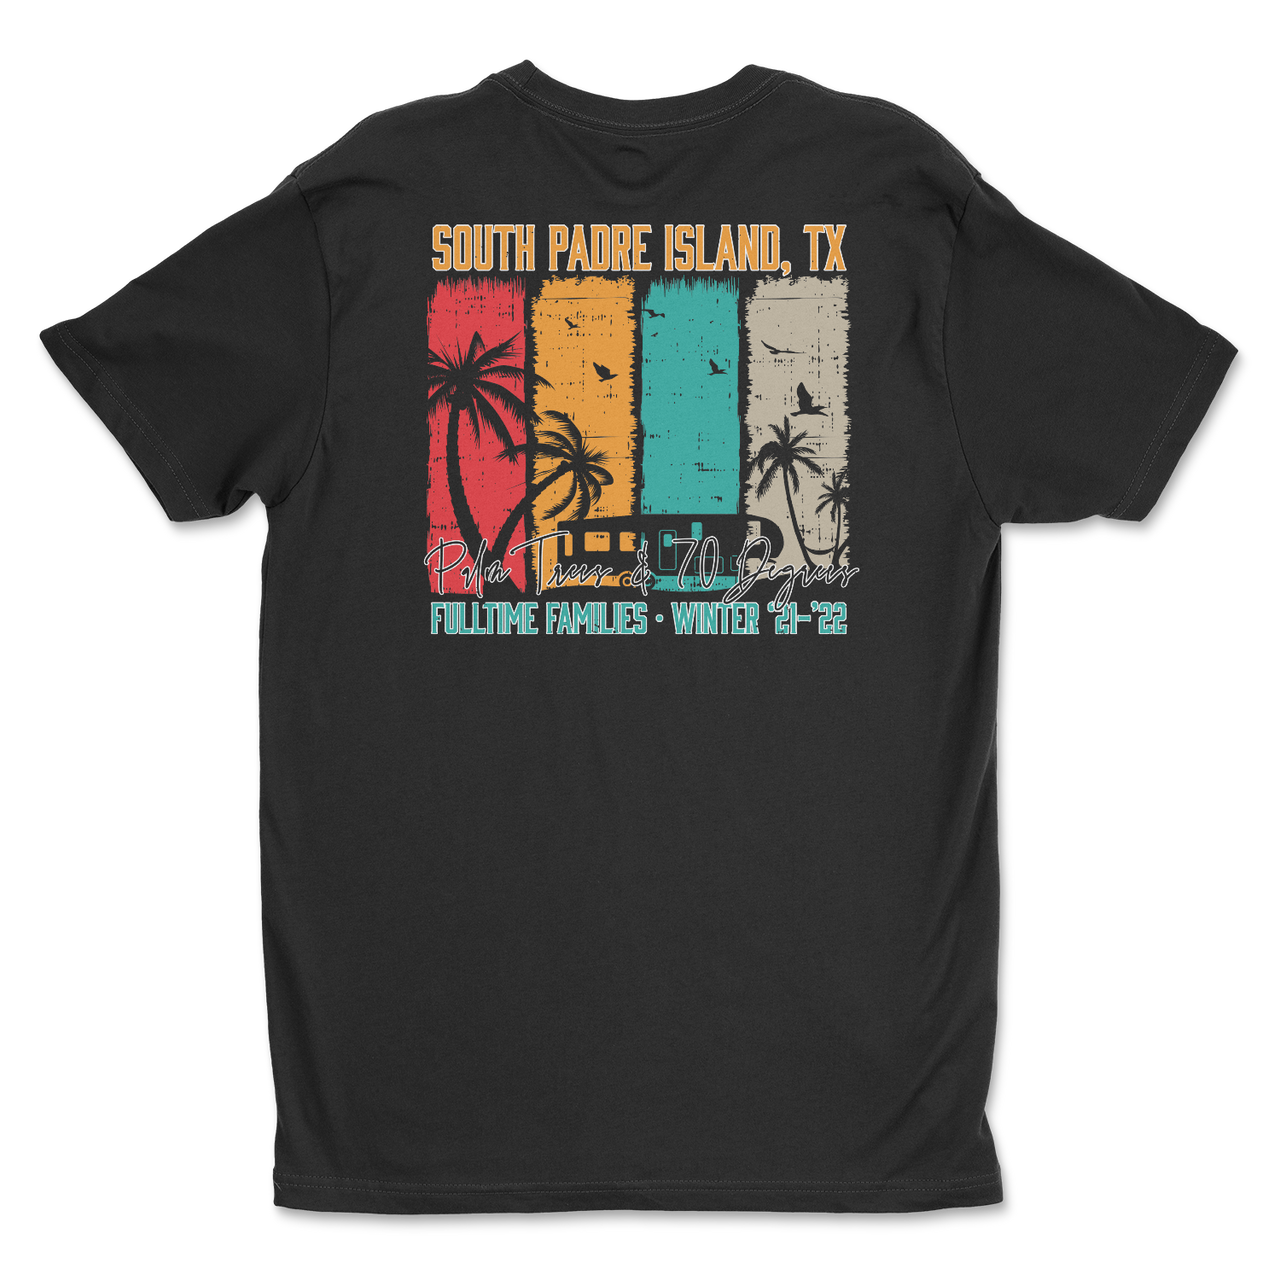 Fulltime Families South Padre Island Winter '21-'22 Limited Edition Shirt